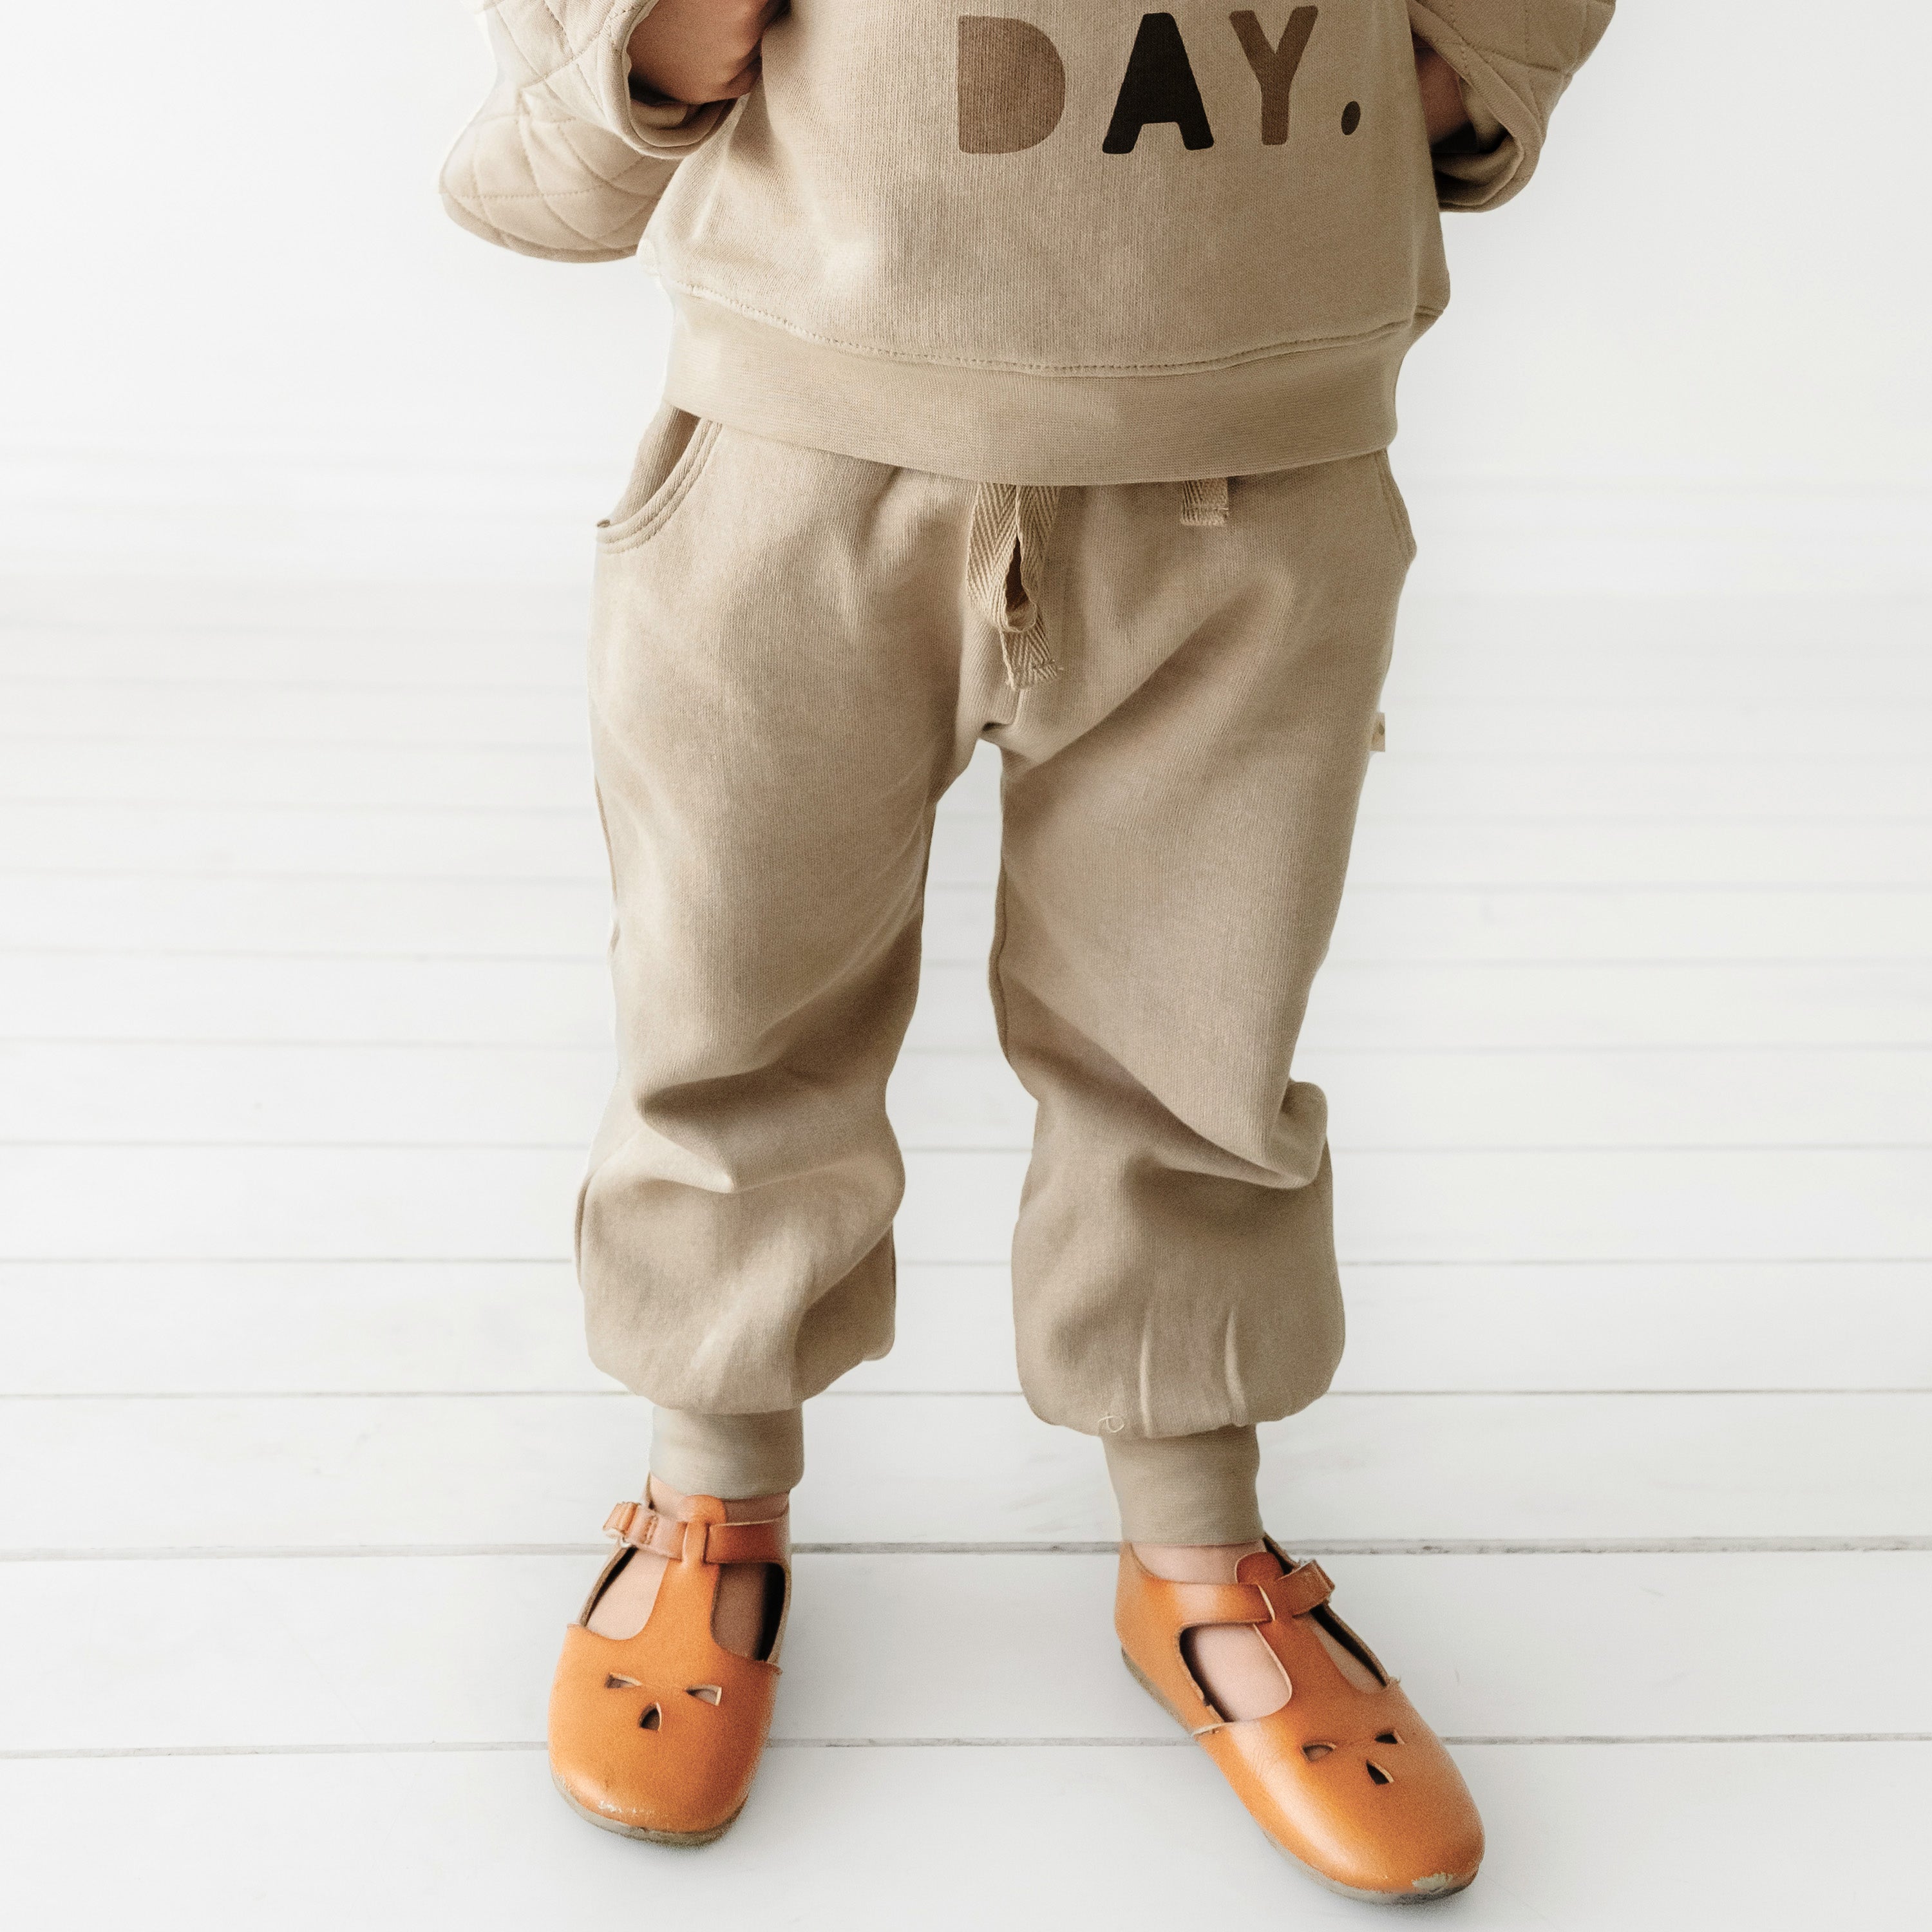 A child clad in Organic Baby's tan Organic Jogger Pants - Mocha and a matching sweatshirt labeled "day" from Makemake Organics stands on a white wooden floor, wearing orange fox-face sandals. Only the lower half of